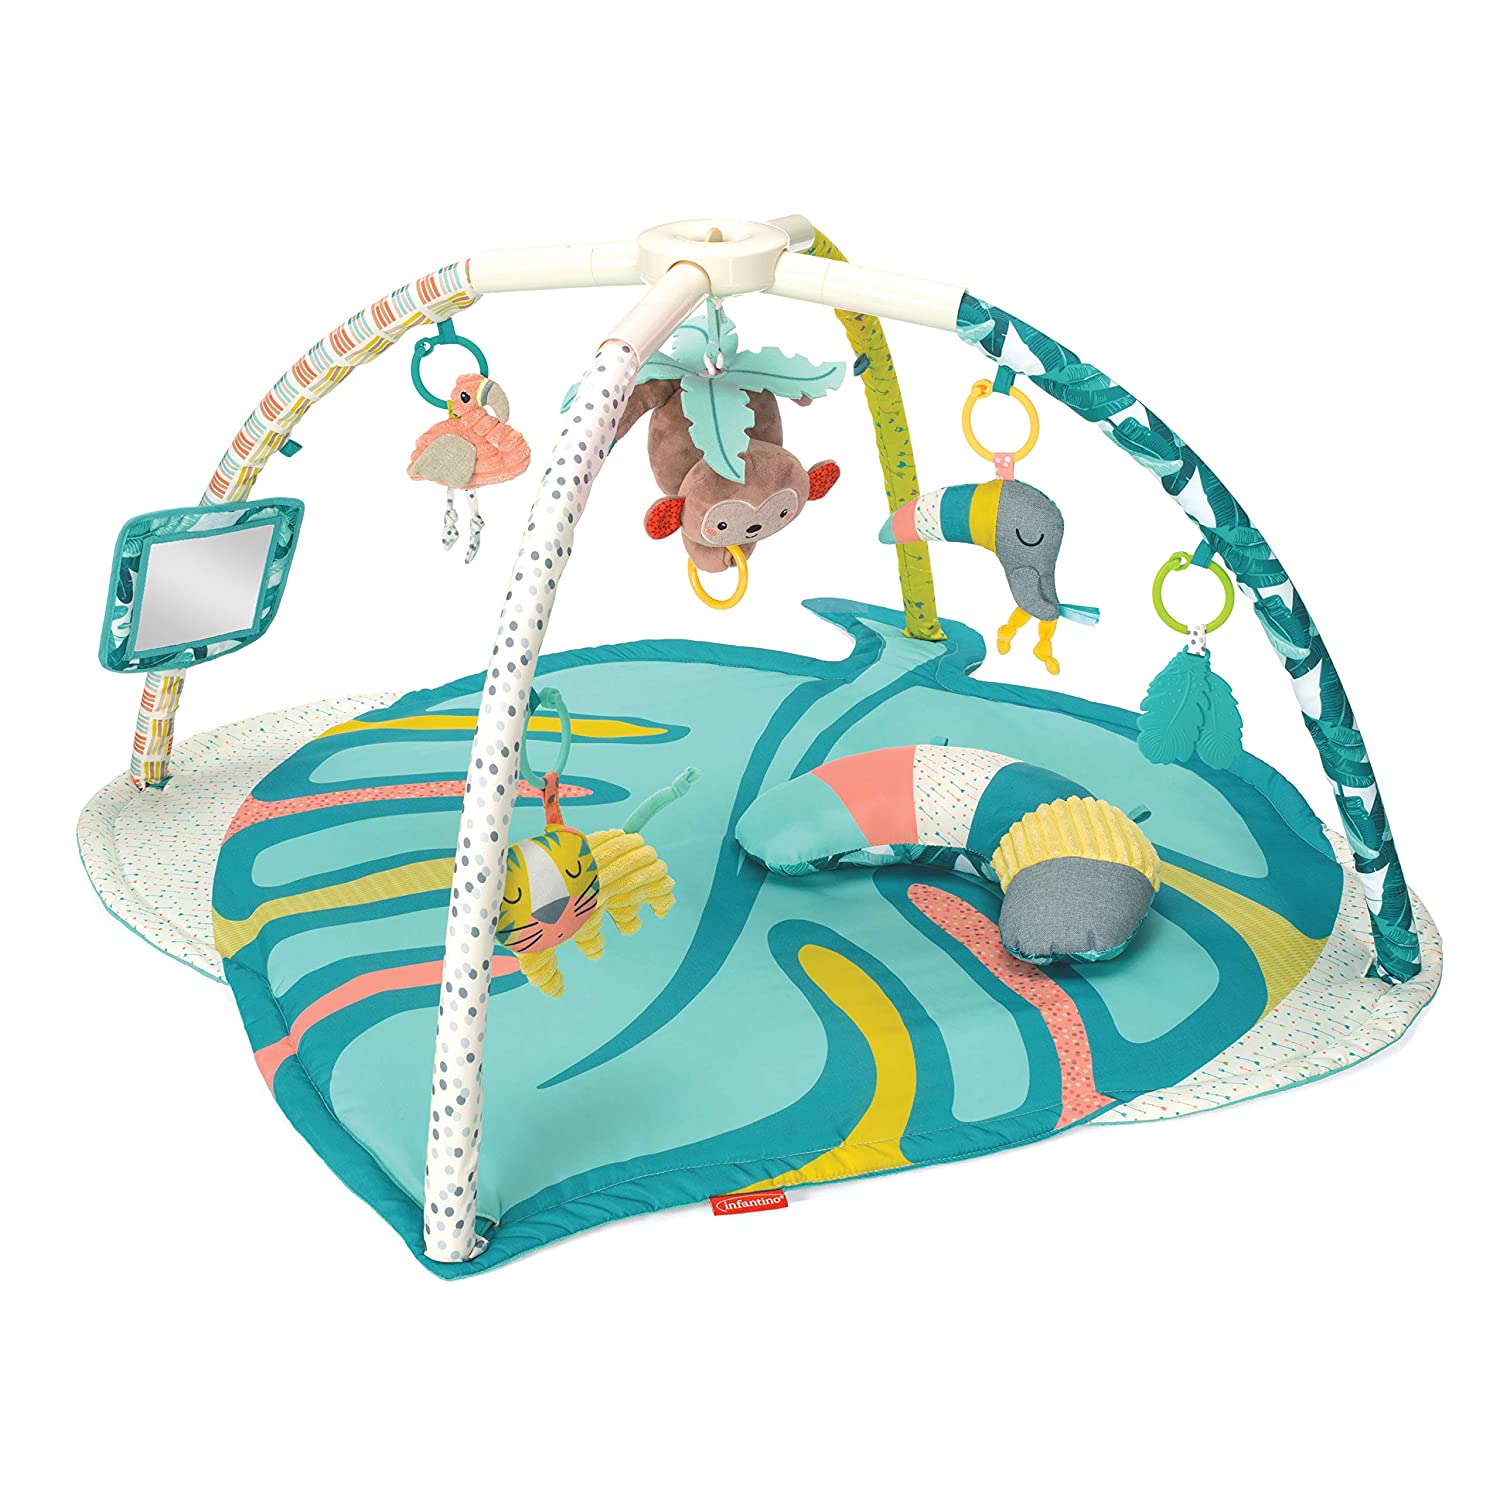 Infantino 4 in 1 Twist & Fold Activity Play Gym